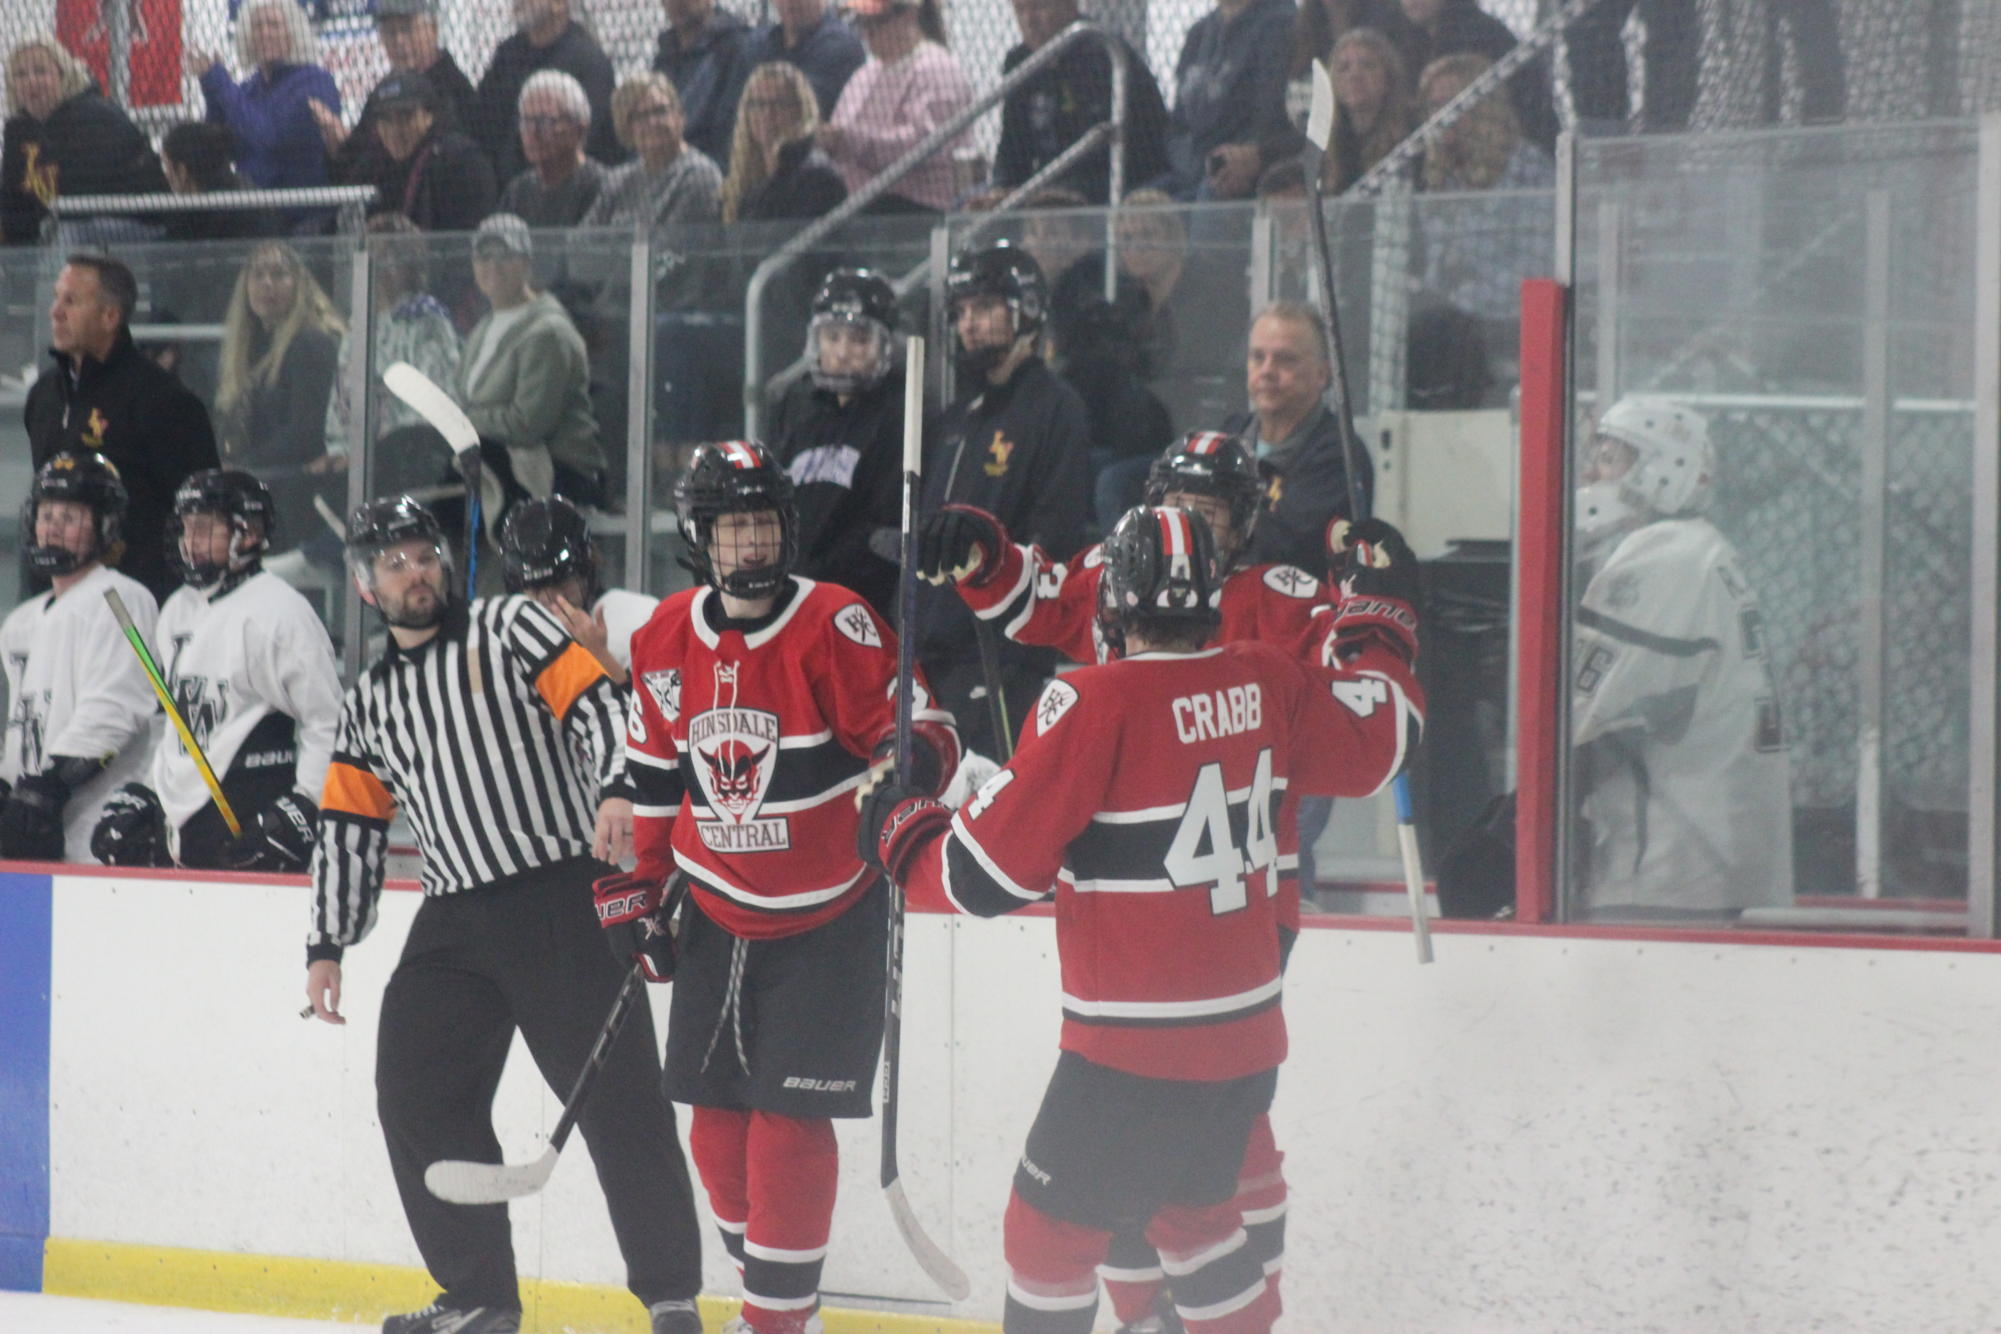 The Devils celebrate their second of five goals against Lincoln-Way.  They would win the game 5-1.